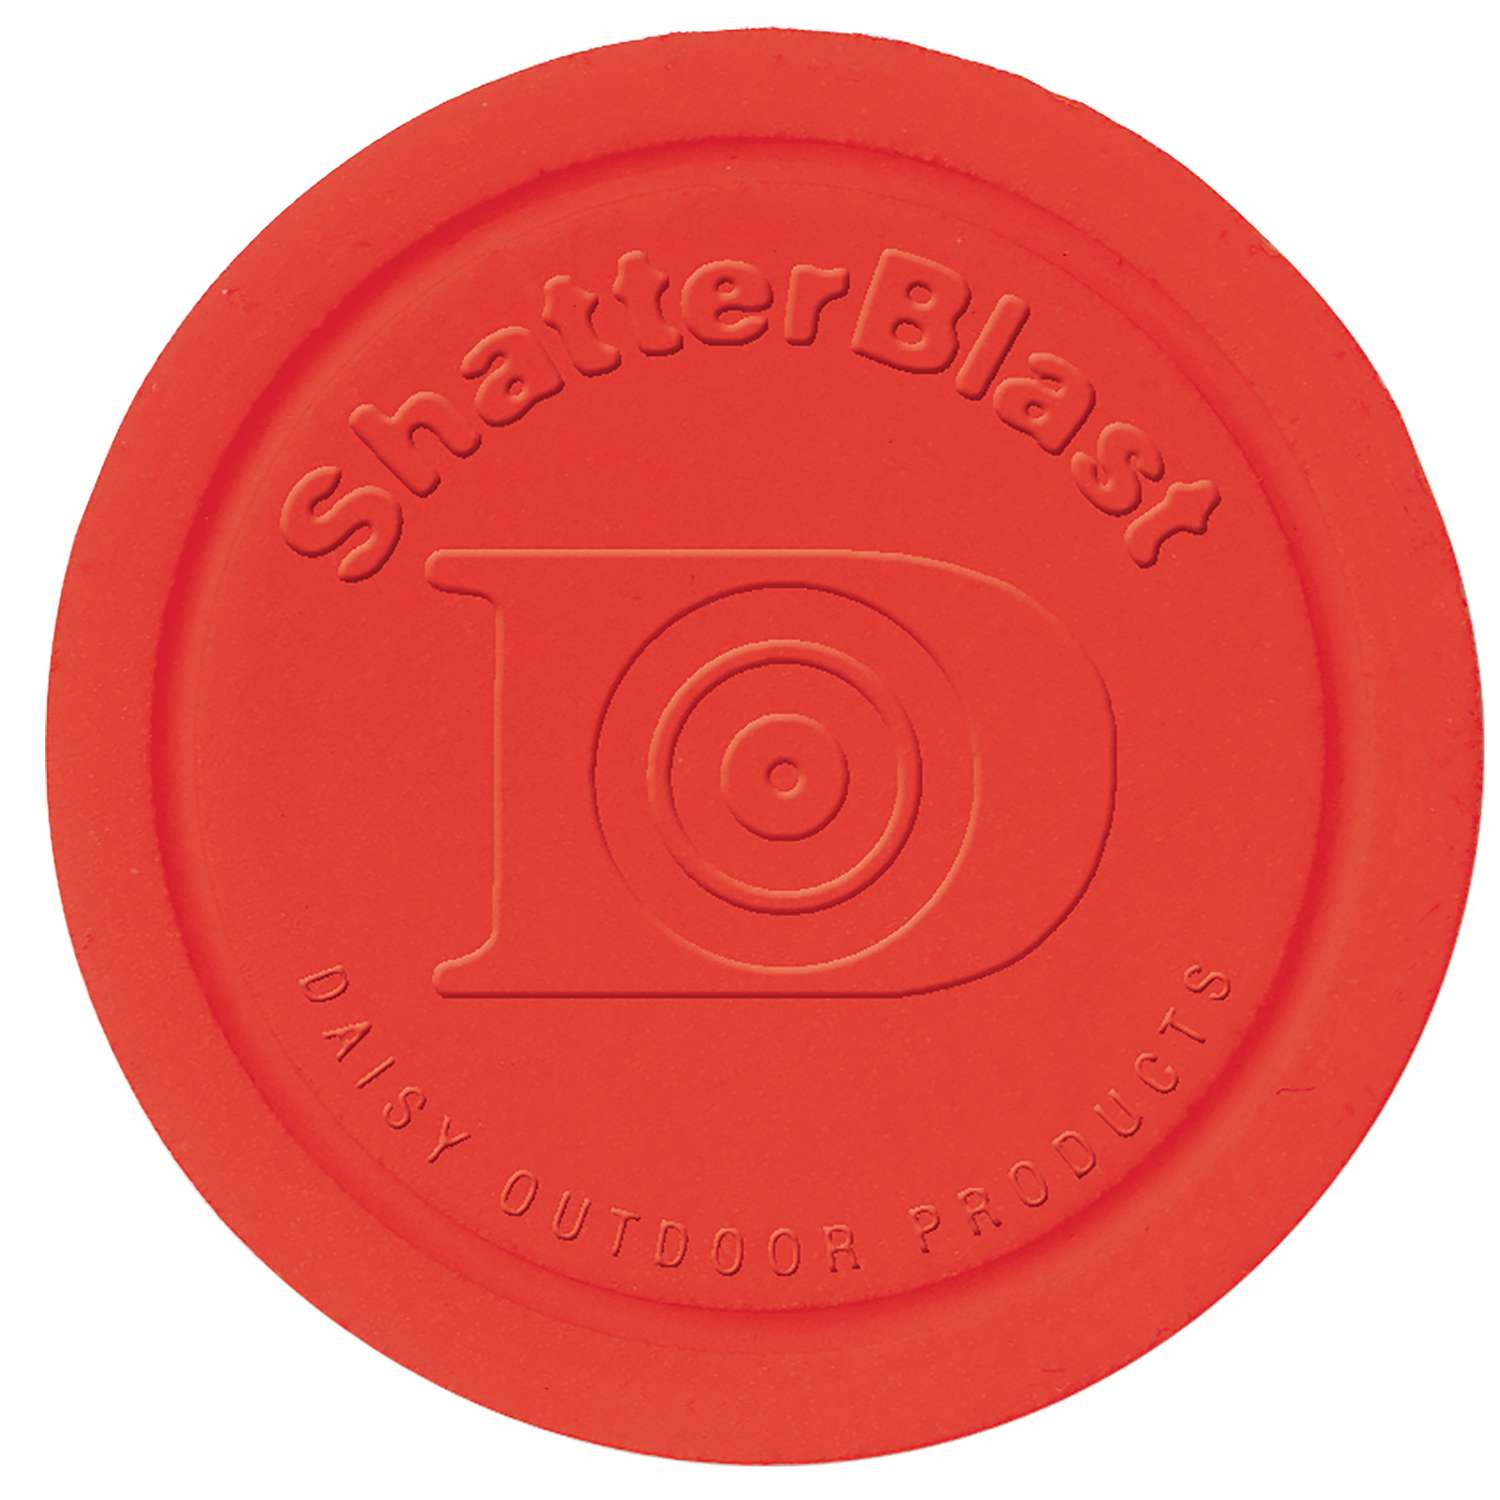 Daisy Outdoor Products Targets Shatterblast Per 60 990873-406 